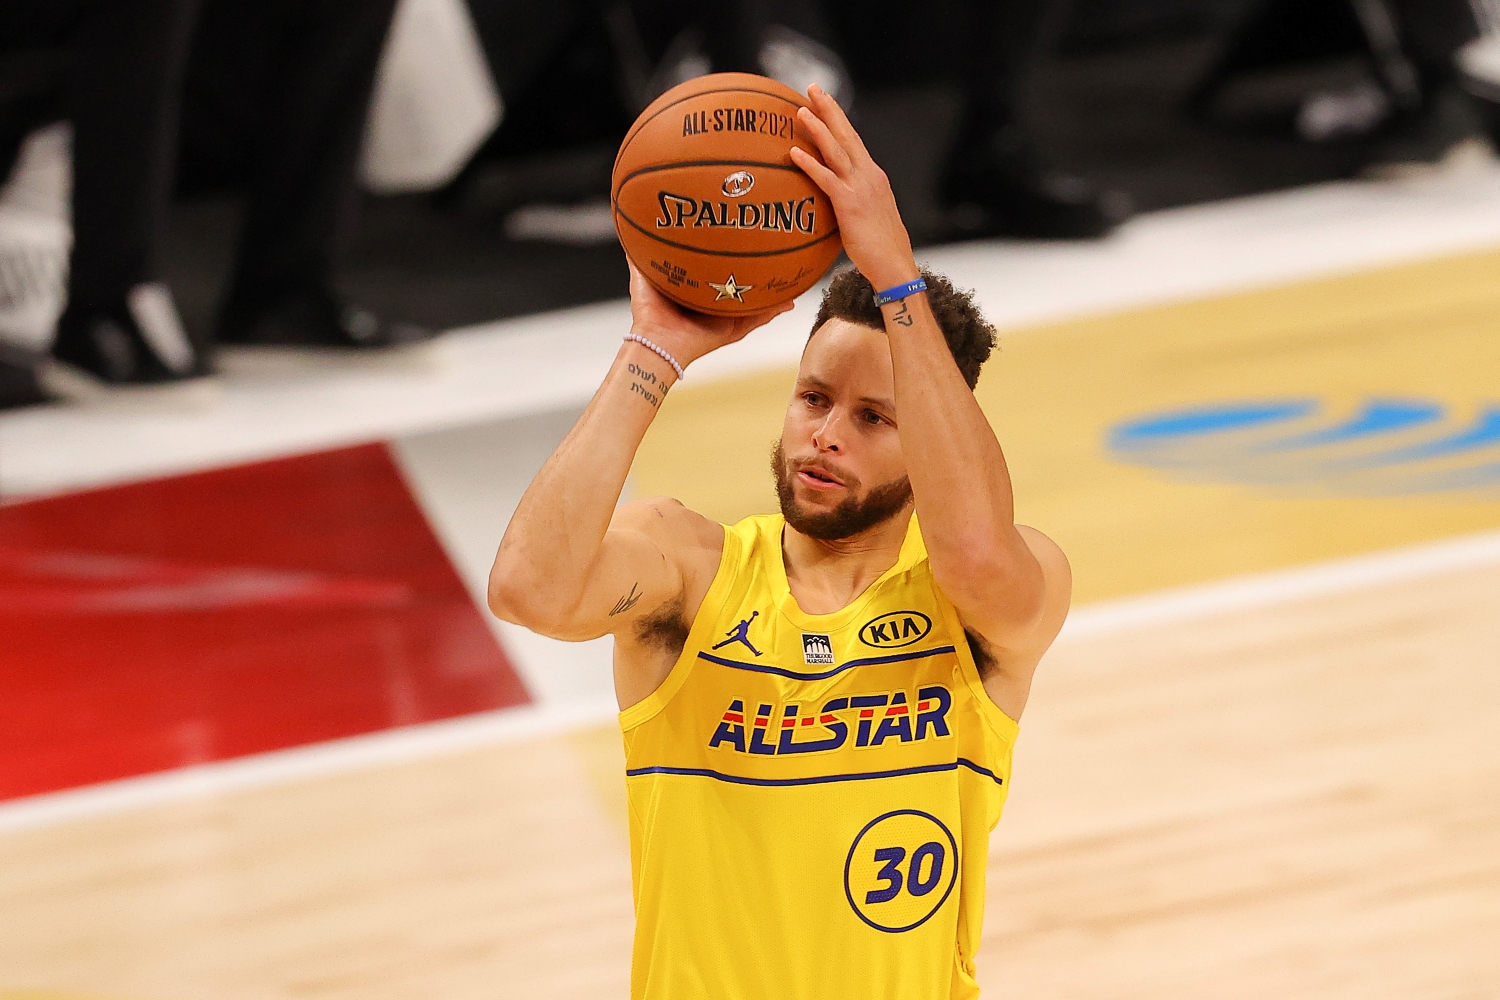 Stephen Curry Sent His About Game After a Future All-Star Dominant His NBA Warning Performance Chilling